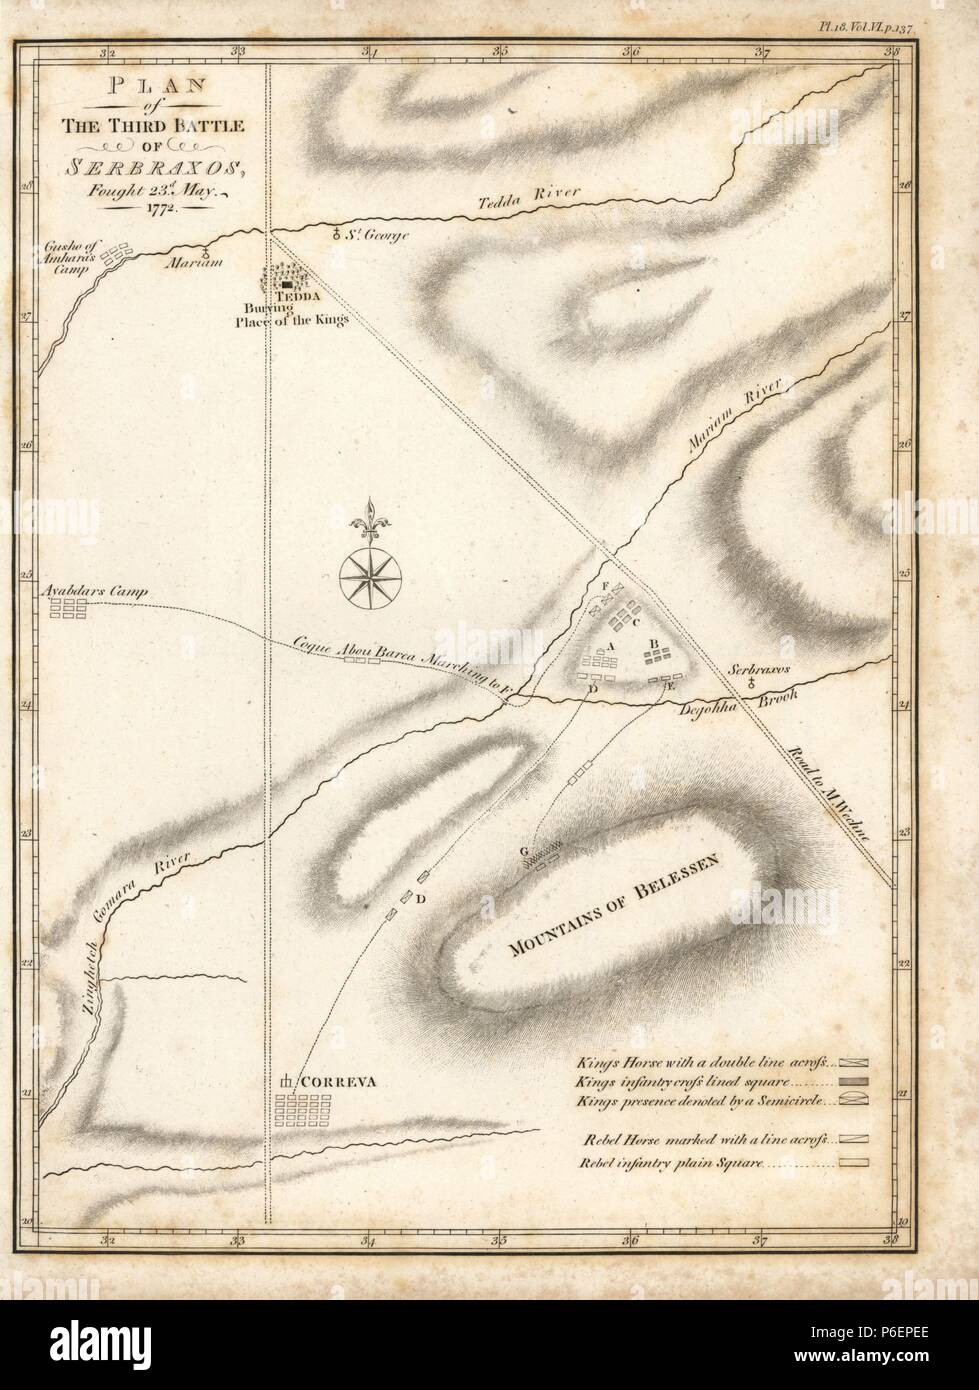 Plan of the third battle of Serbraxos, 23 May 1772. Copperplate engraving from James Bruce's 'Travels to Discover the Source of the Nile, in the years 1768, 1769, 1770, 1771, 1772 and 1773,' London, 1790. James Bruce (1730-1794) was a Scottish explorer and travel writer who spent more than 12 years in North Africa and Ethiopia. Engraved by Heath after an original drawing by Bruce. Stock Photo